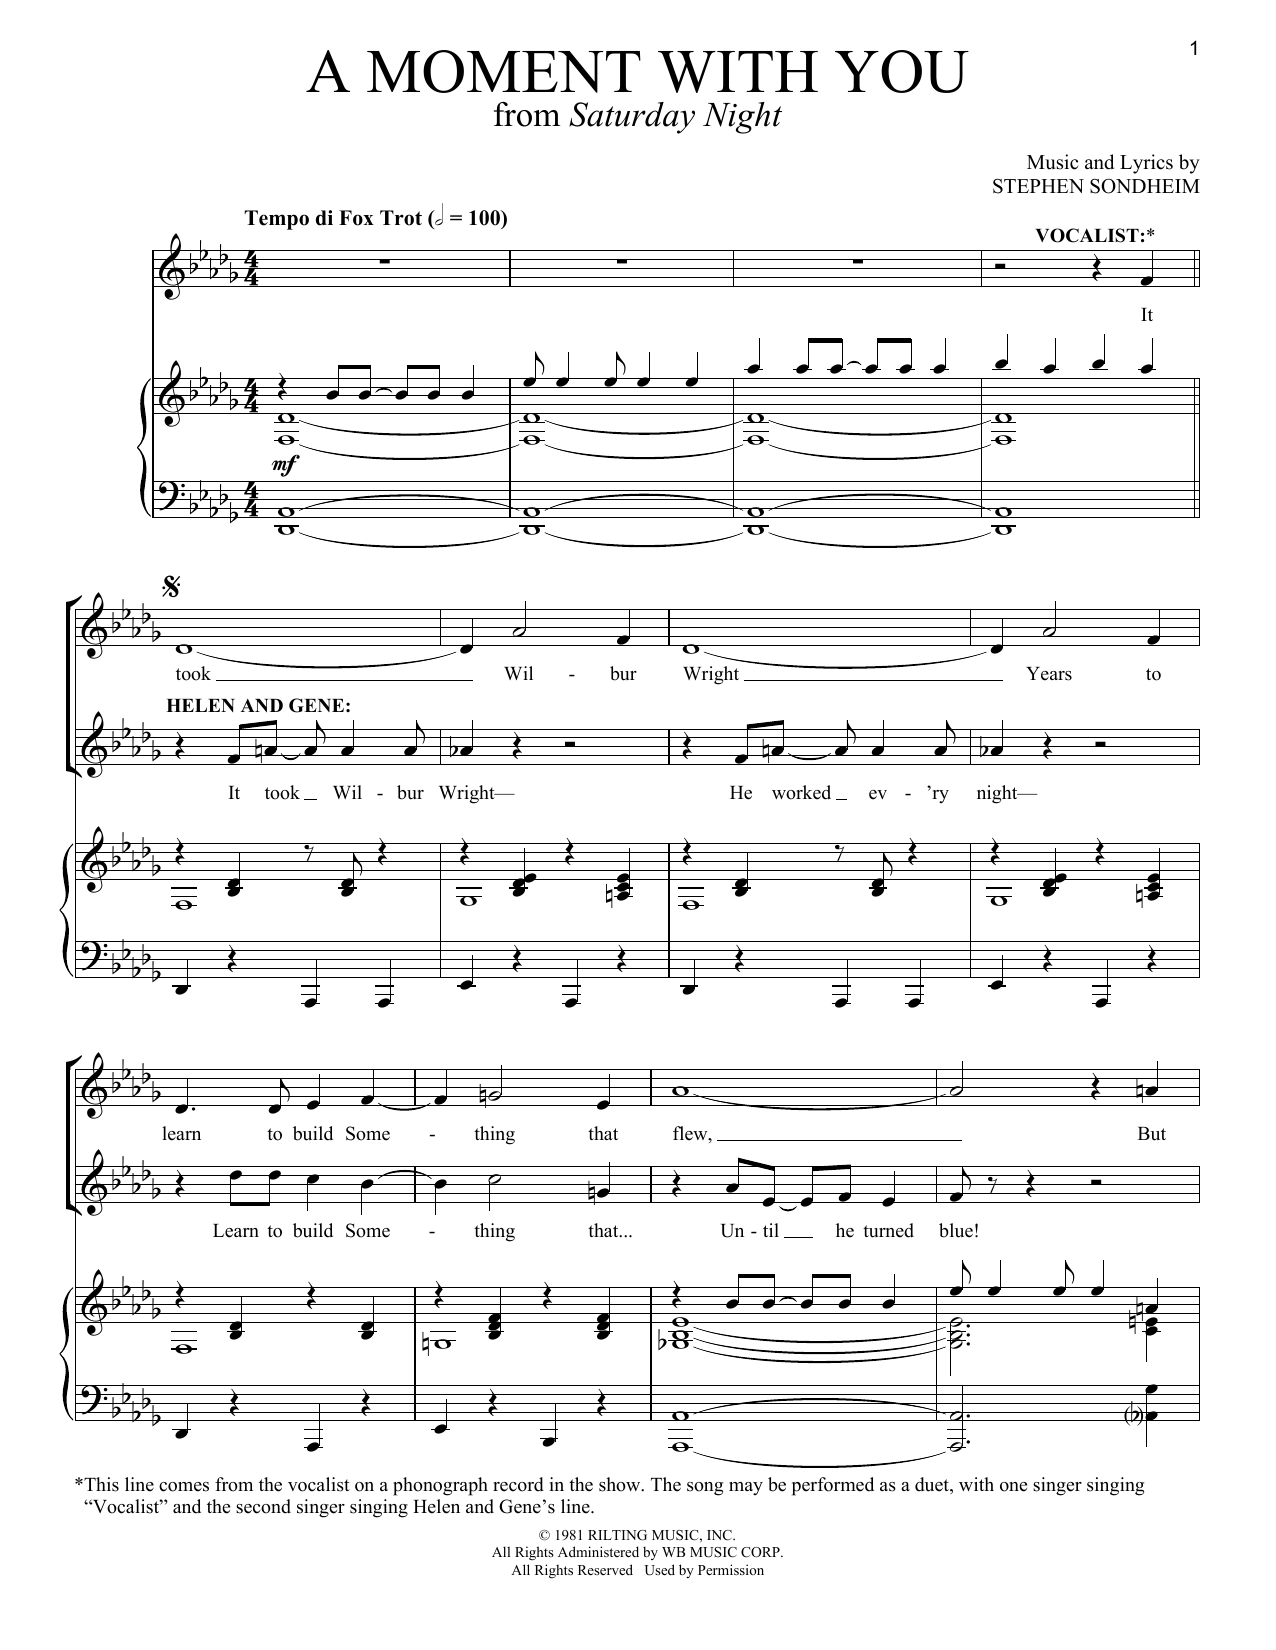 Stephen Sondheim A Moment With You sheet music notes and chords. Download Printable PDF.